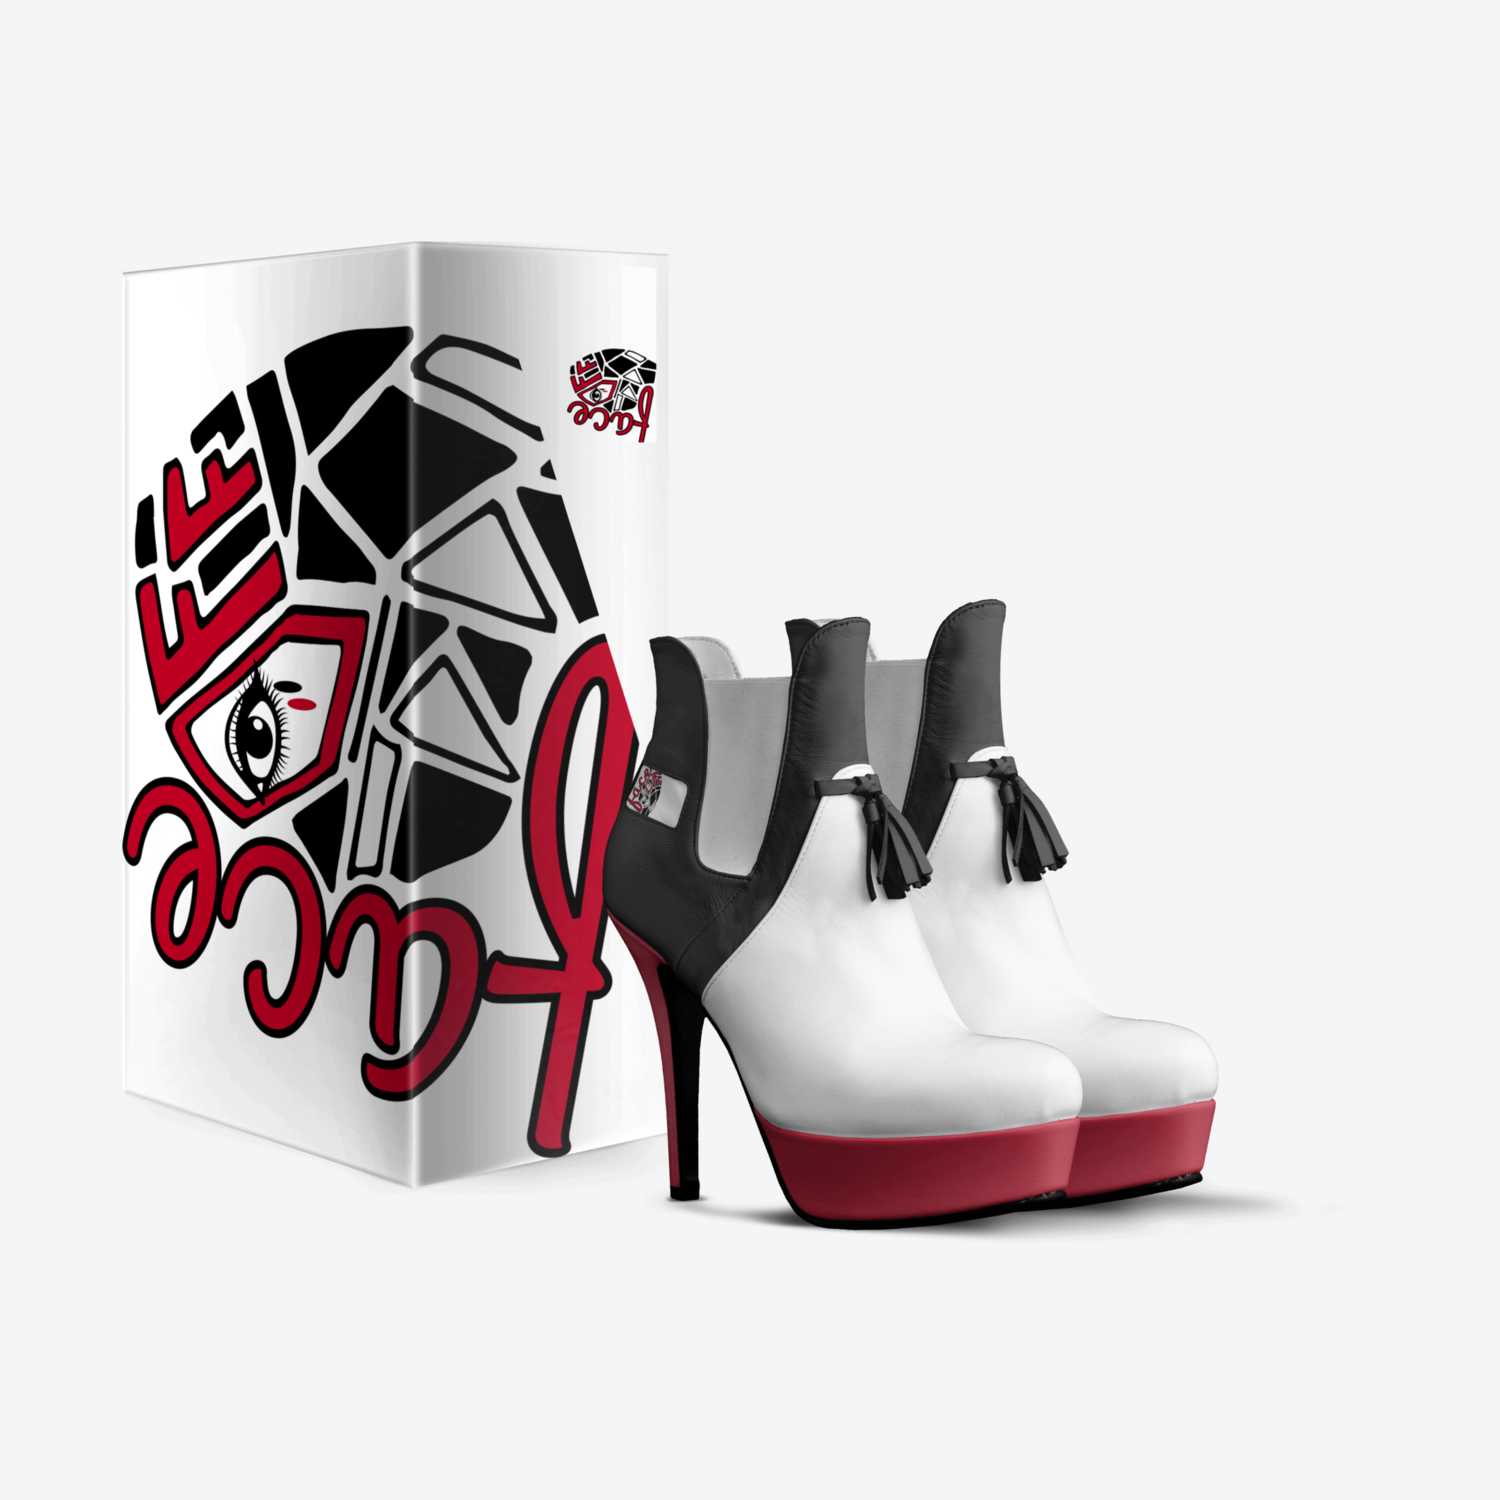 FACE OFF custom made in Italy shoes by Diana Villavicencio | Box view